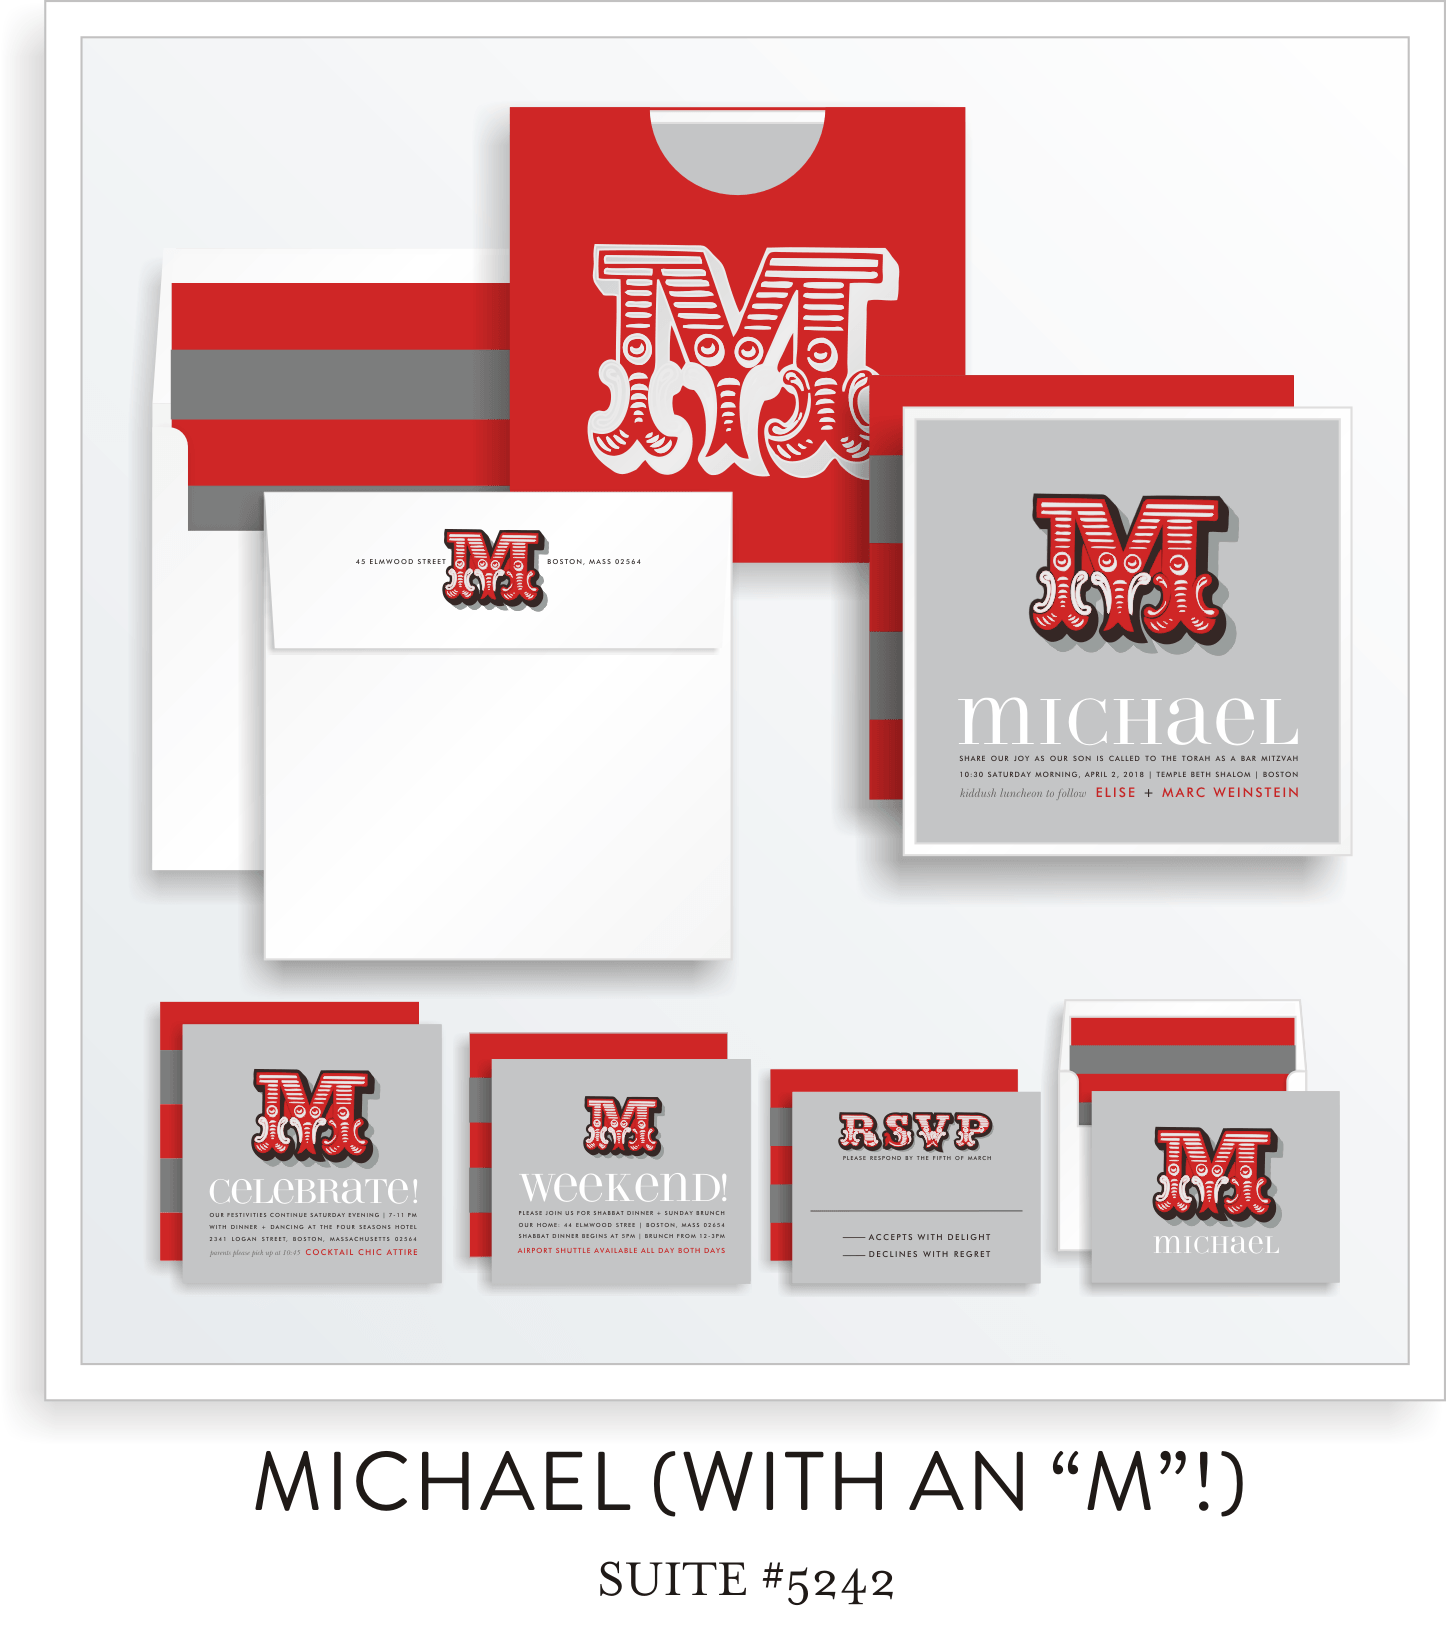 Copy of Bar Mitzvah Invitation Suite 5242 - Michael with an "M"